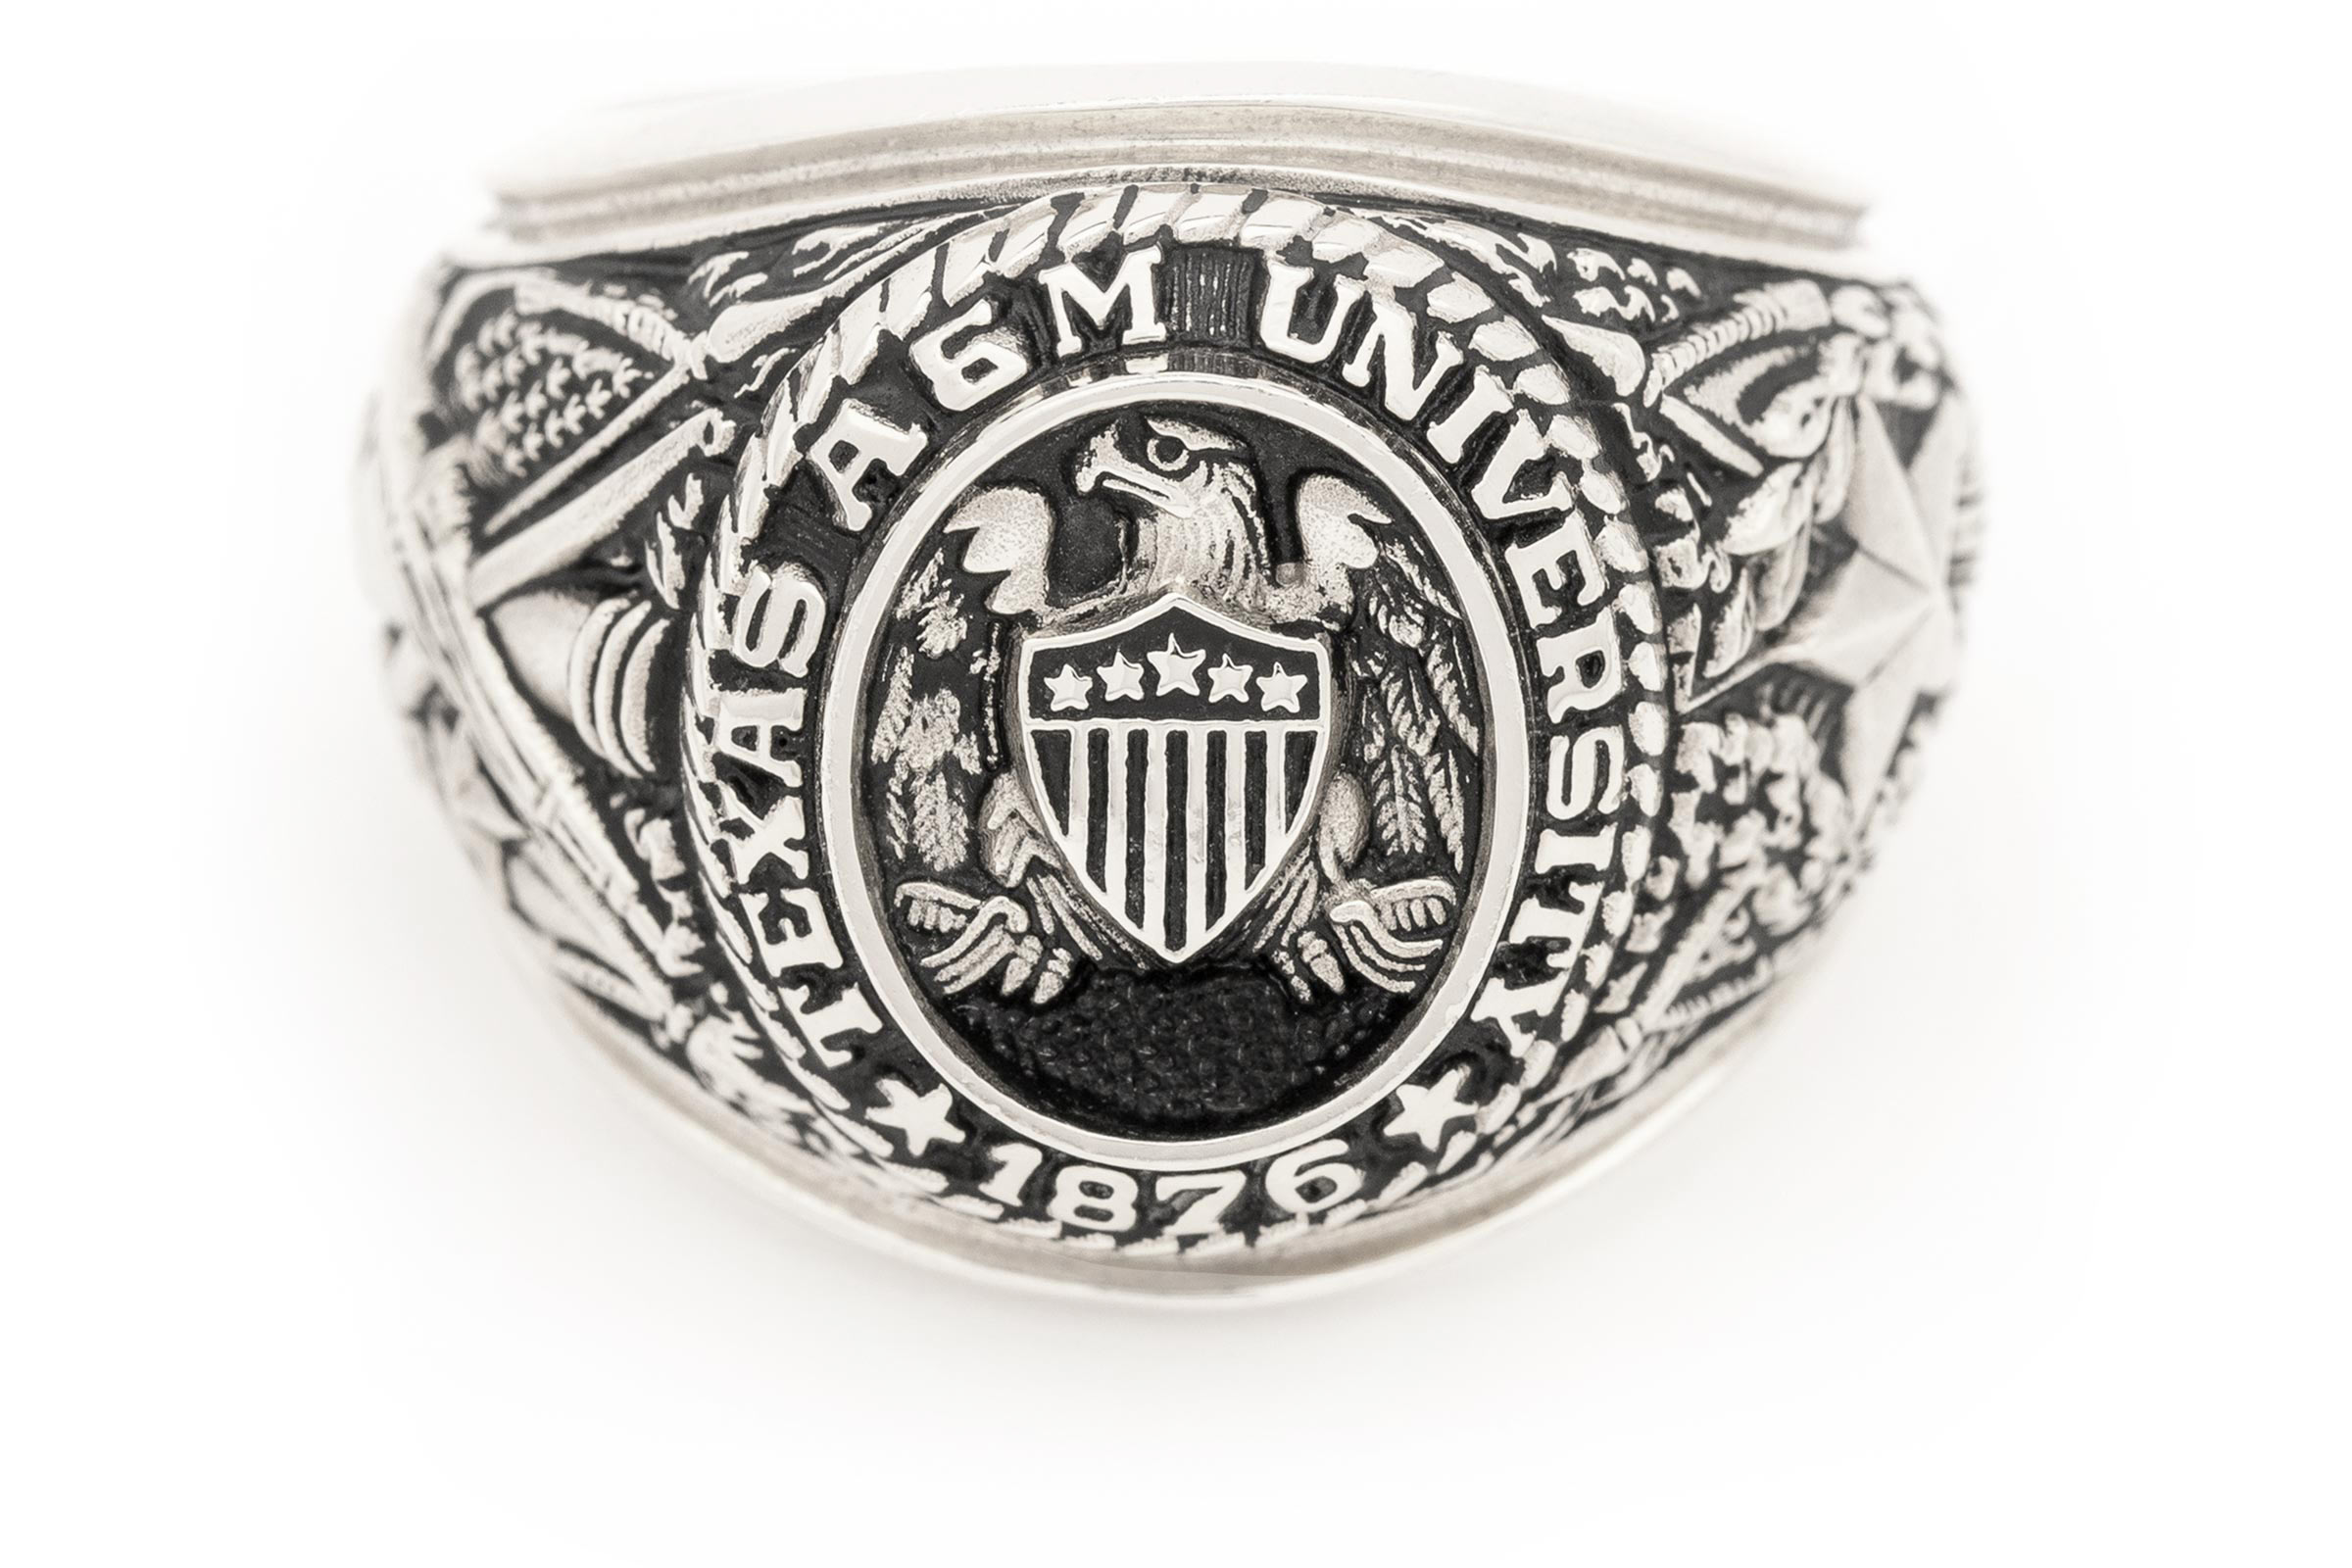 Full Logo College Jewelry Texas A&M University Aggies Rings Stainless Steel 6MM Wide Ring Band